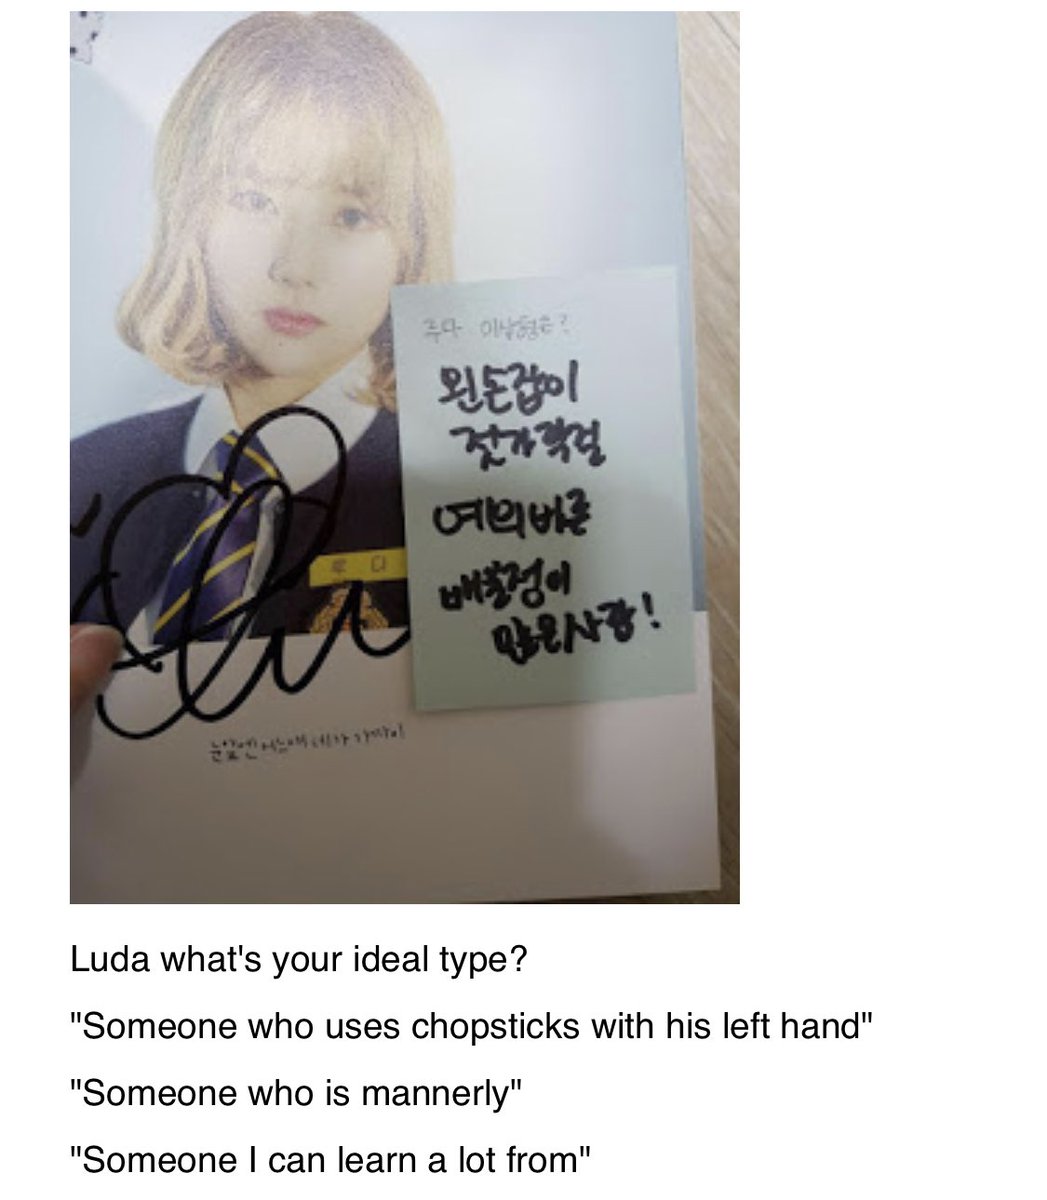 luda getting caught in dating rumors with monsta x i.m cause she said she likes left handed guys 